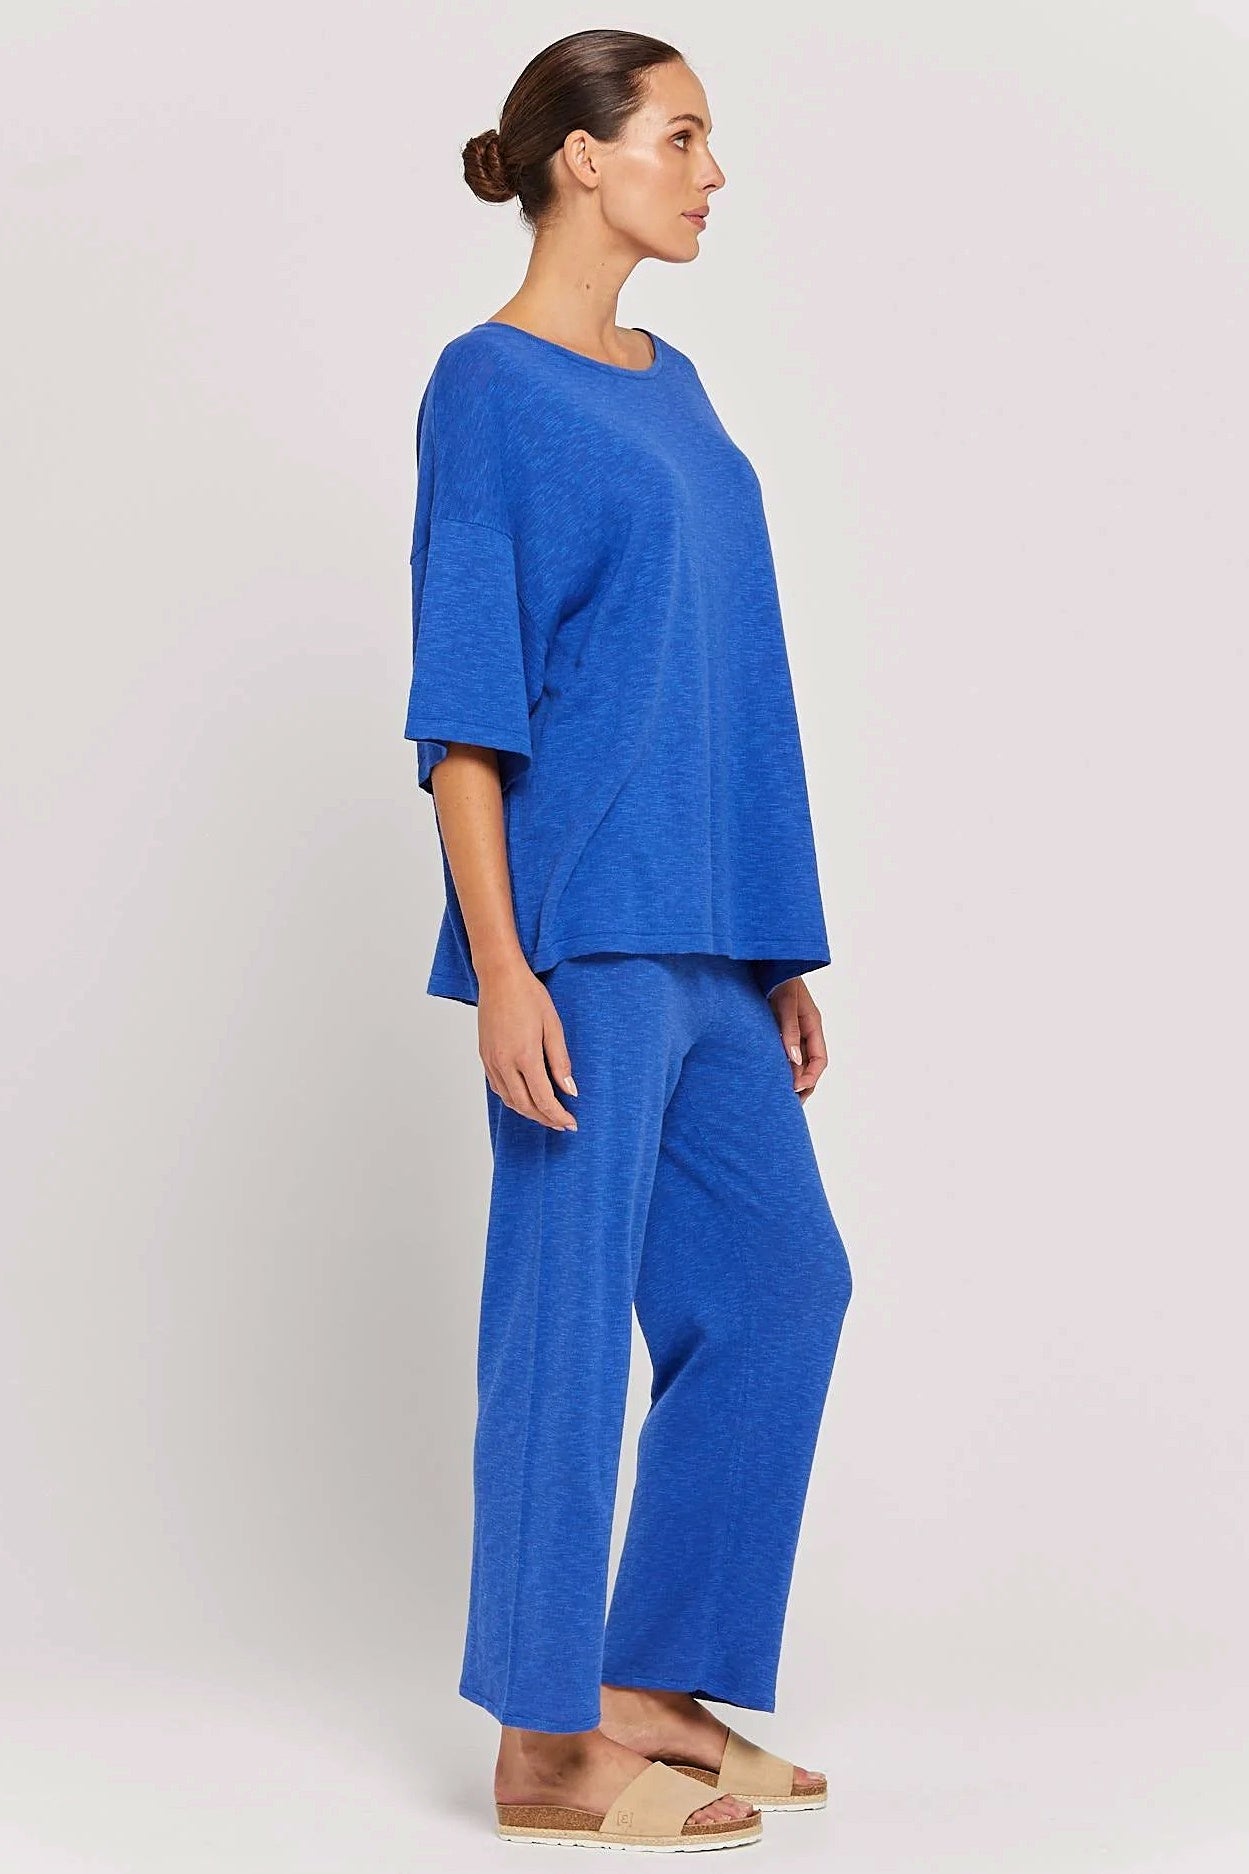 BY RIDLEY Womens Allyson Linen Pant - Royal Blue